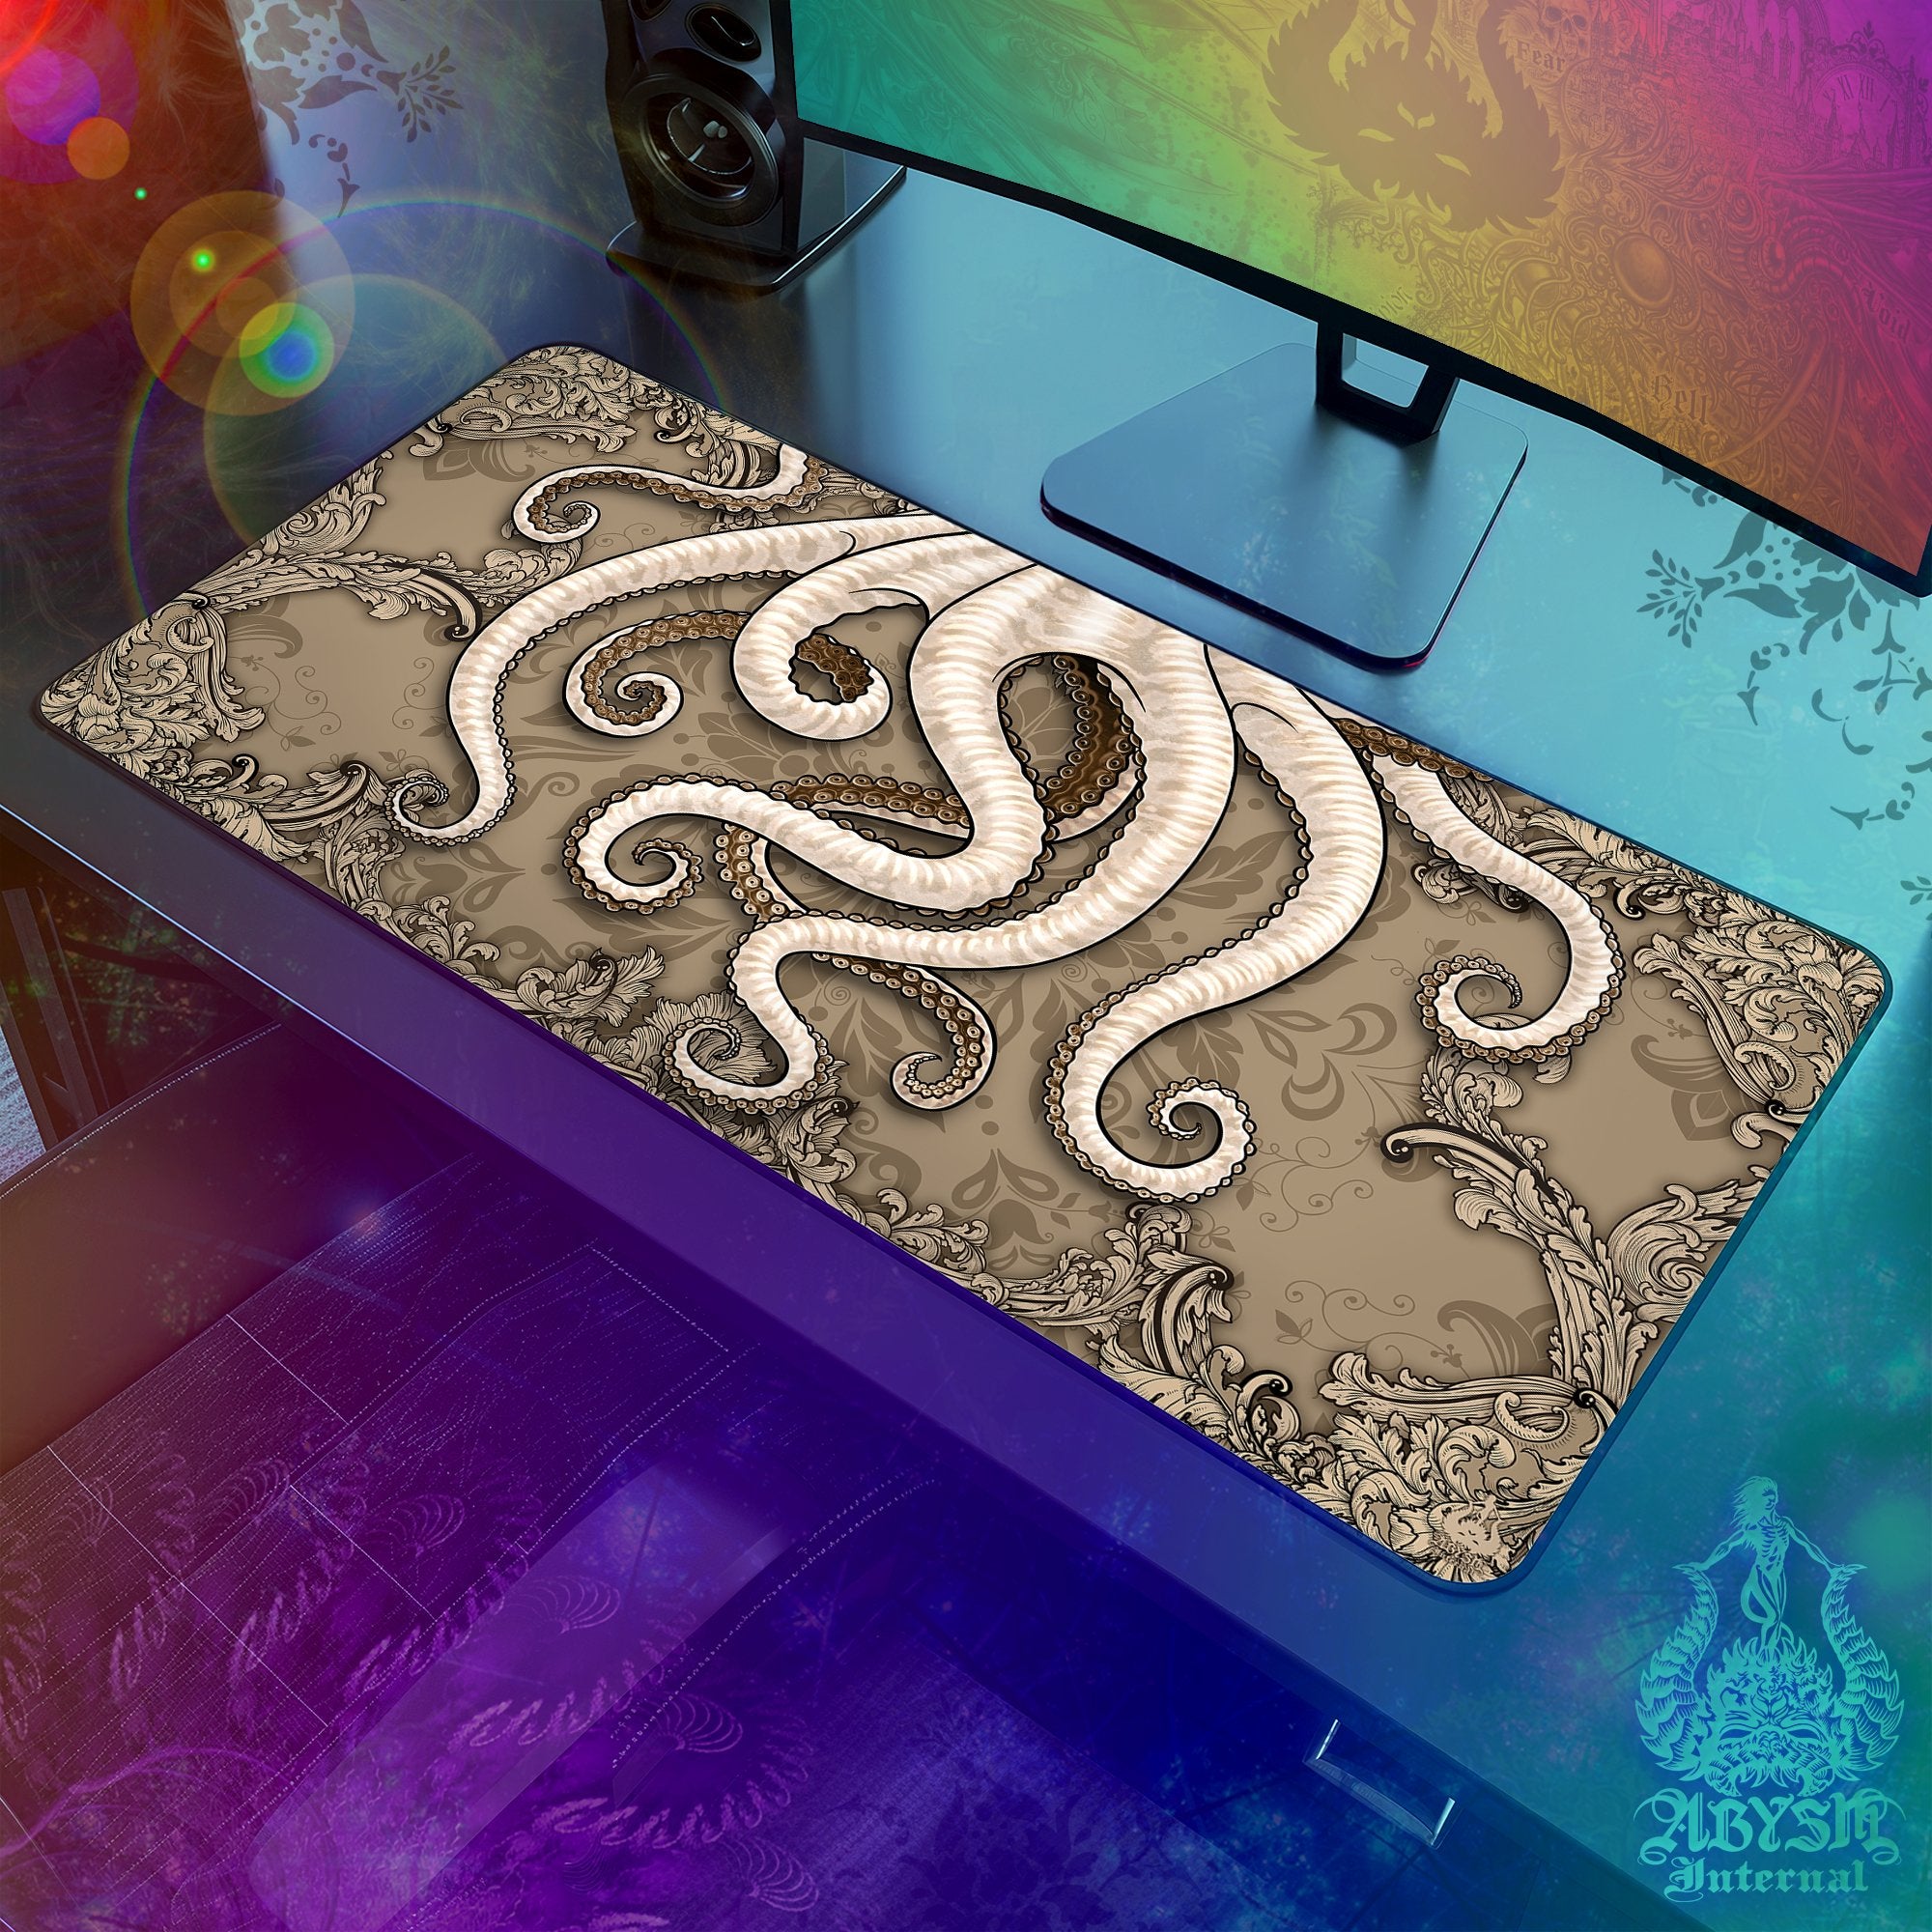 Octopus Mouse Pad, Tentacles Gaming Desk Mat, Beige Workpad, Cream Table Protector Cover, Fantasy Art Print - Abysm Internal